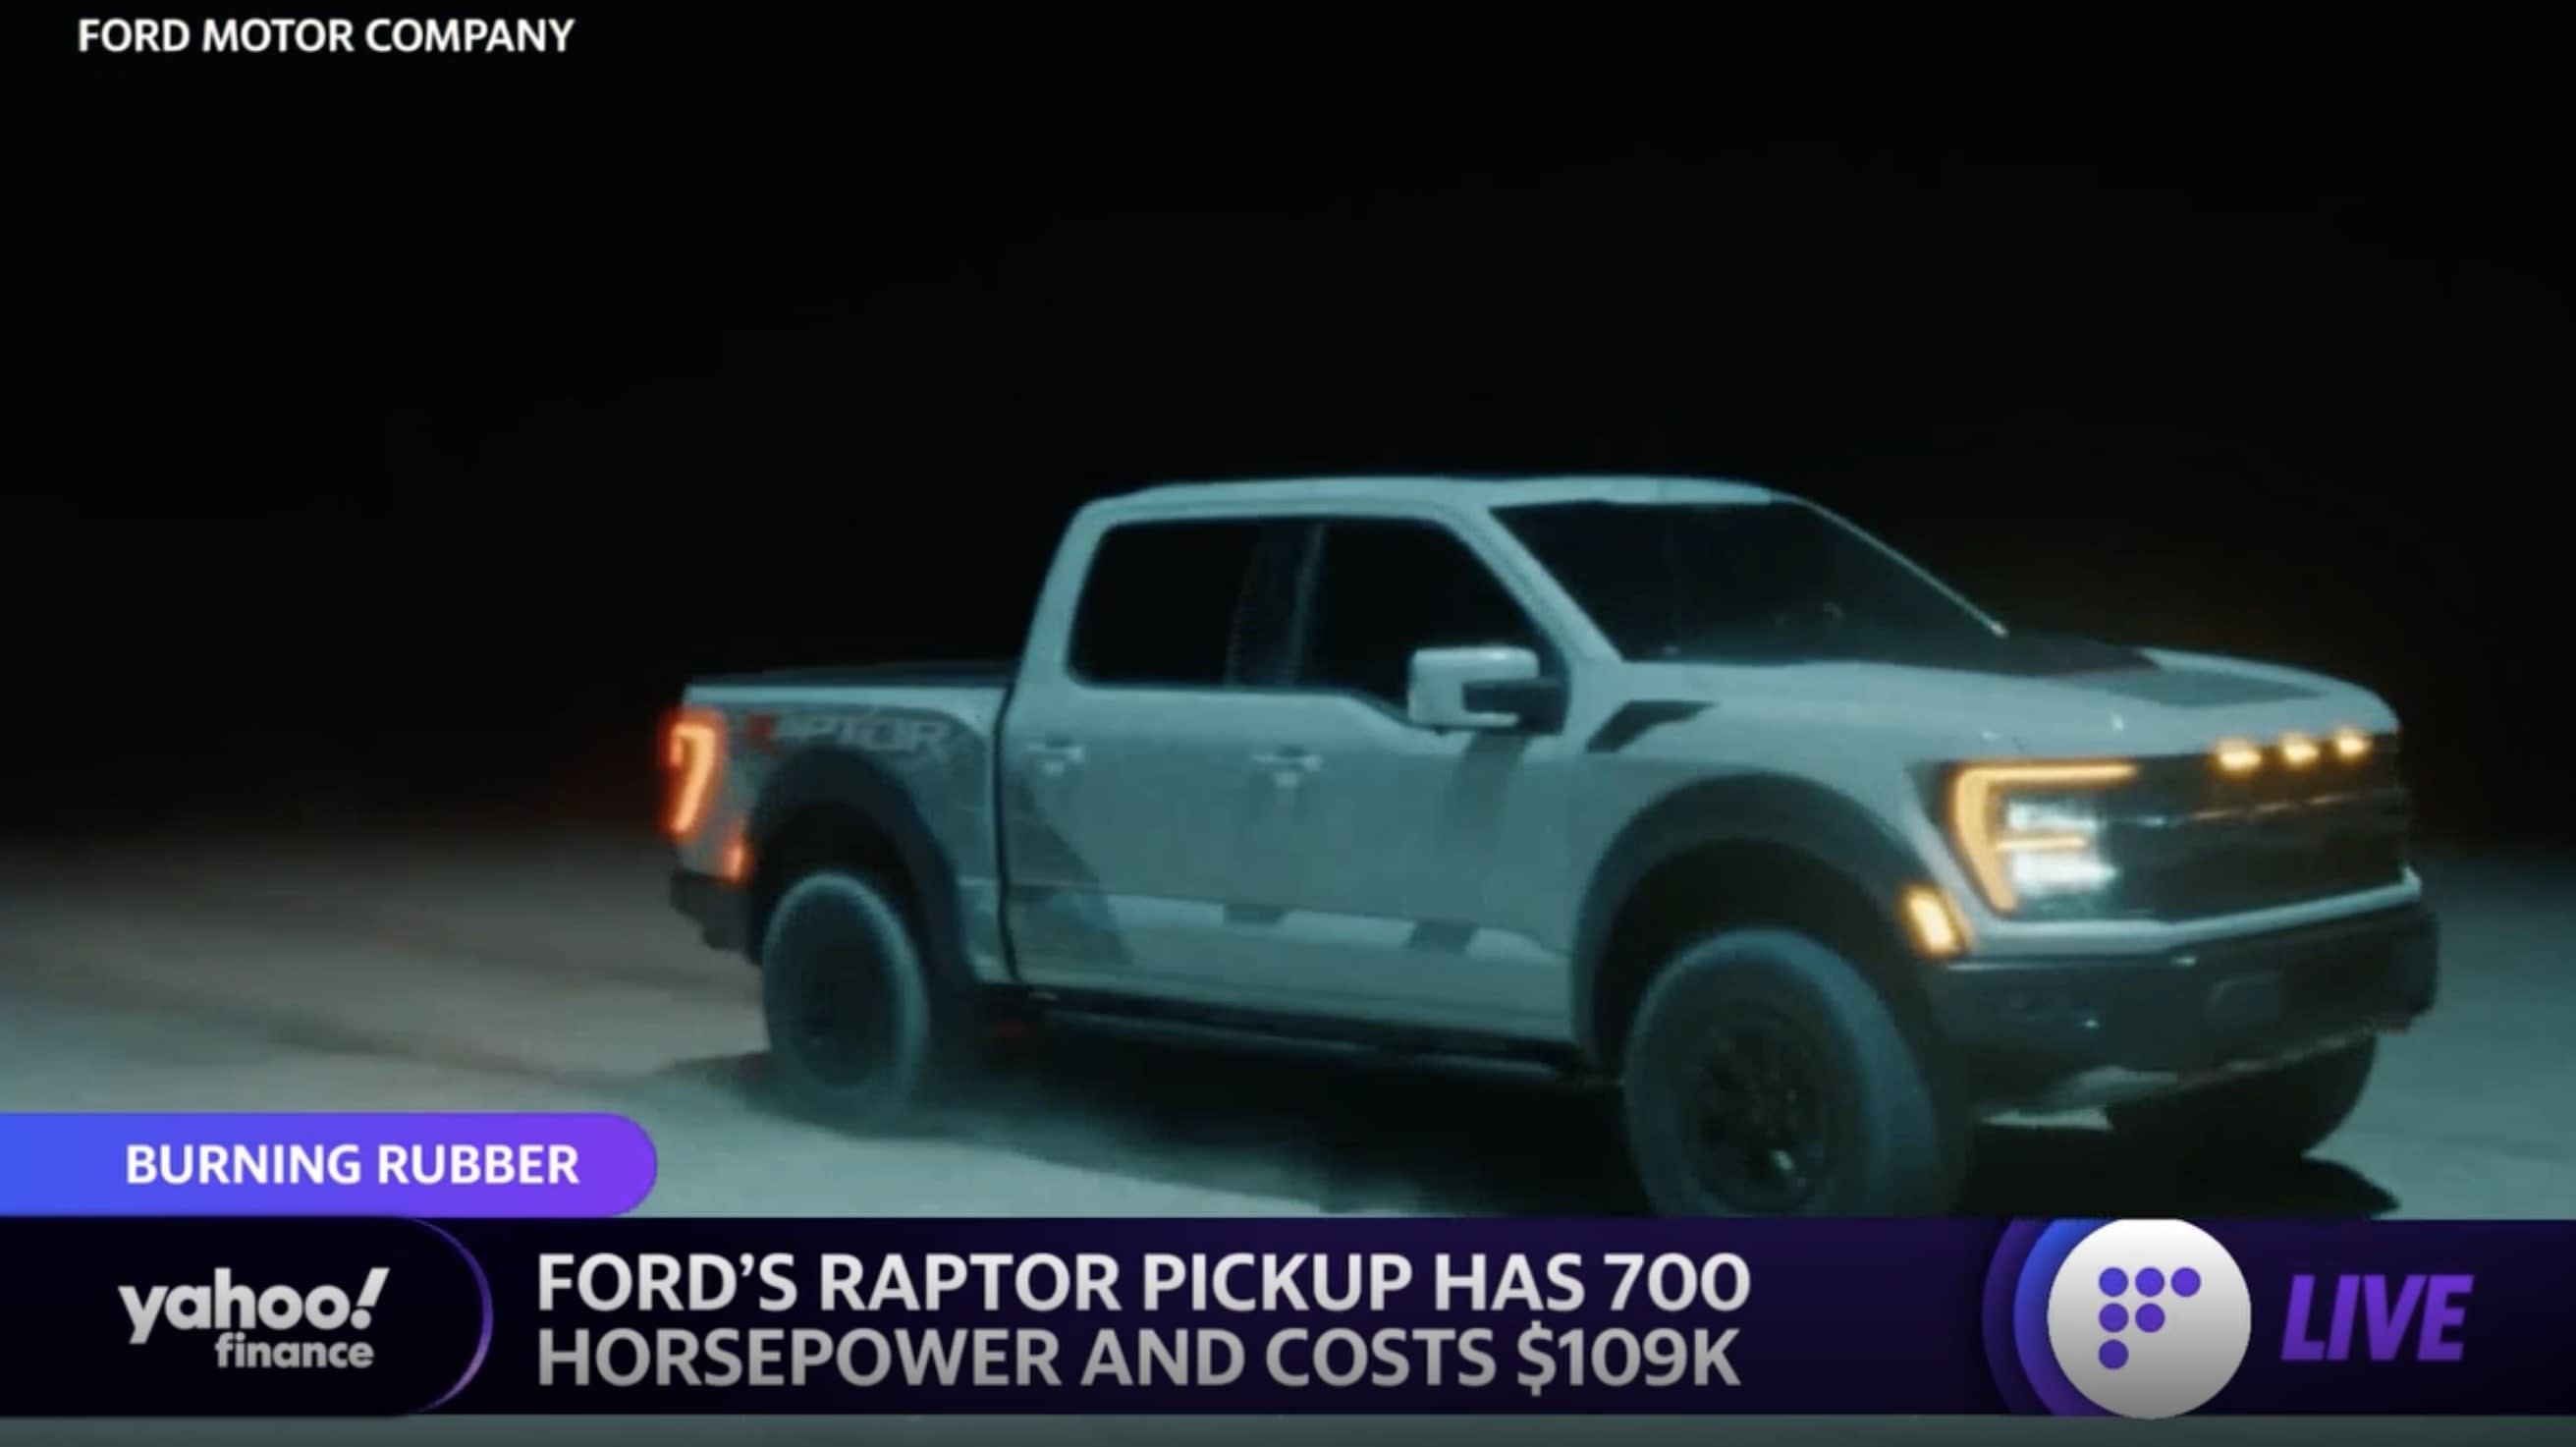 Ford unveils new F-150 Raptor R pickup with 700 horsepower